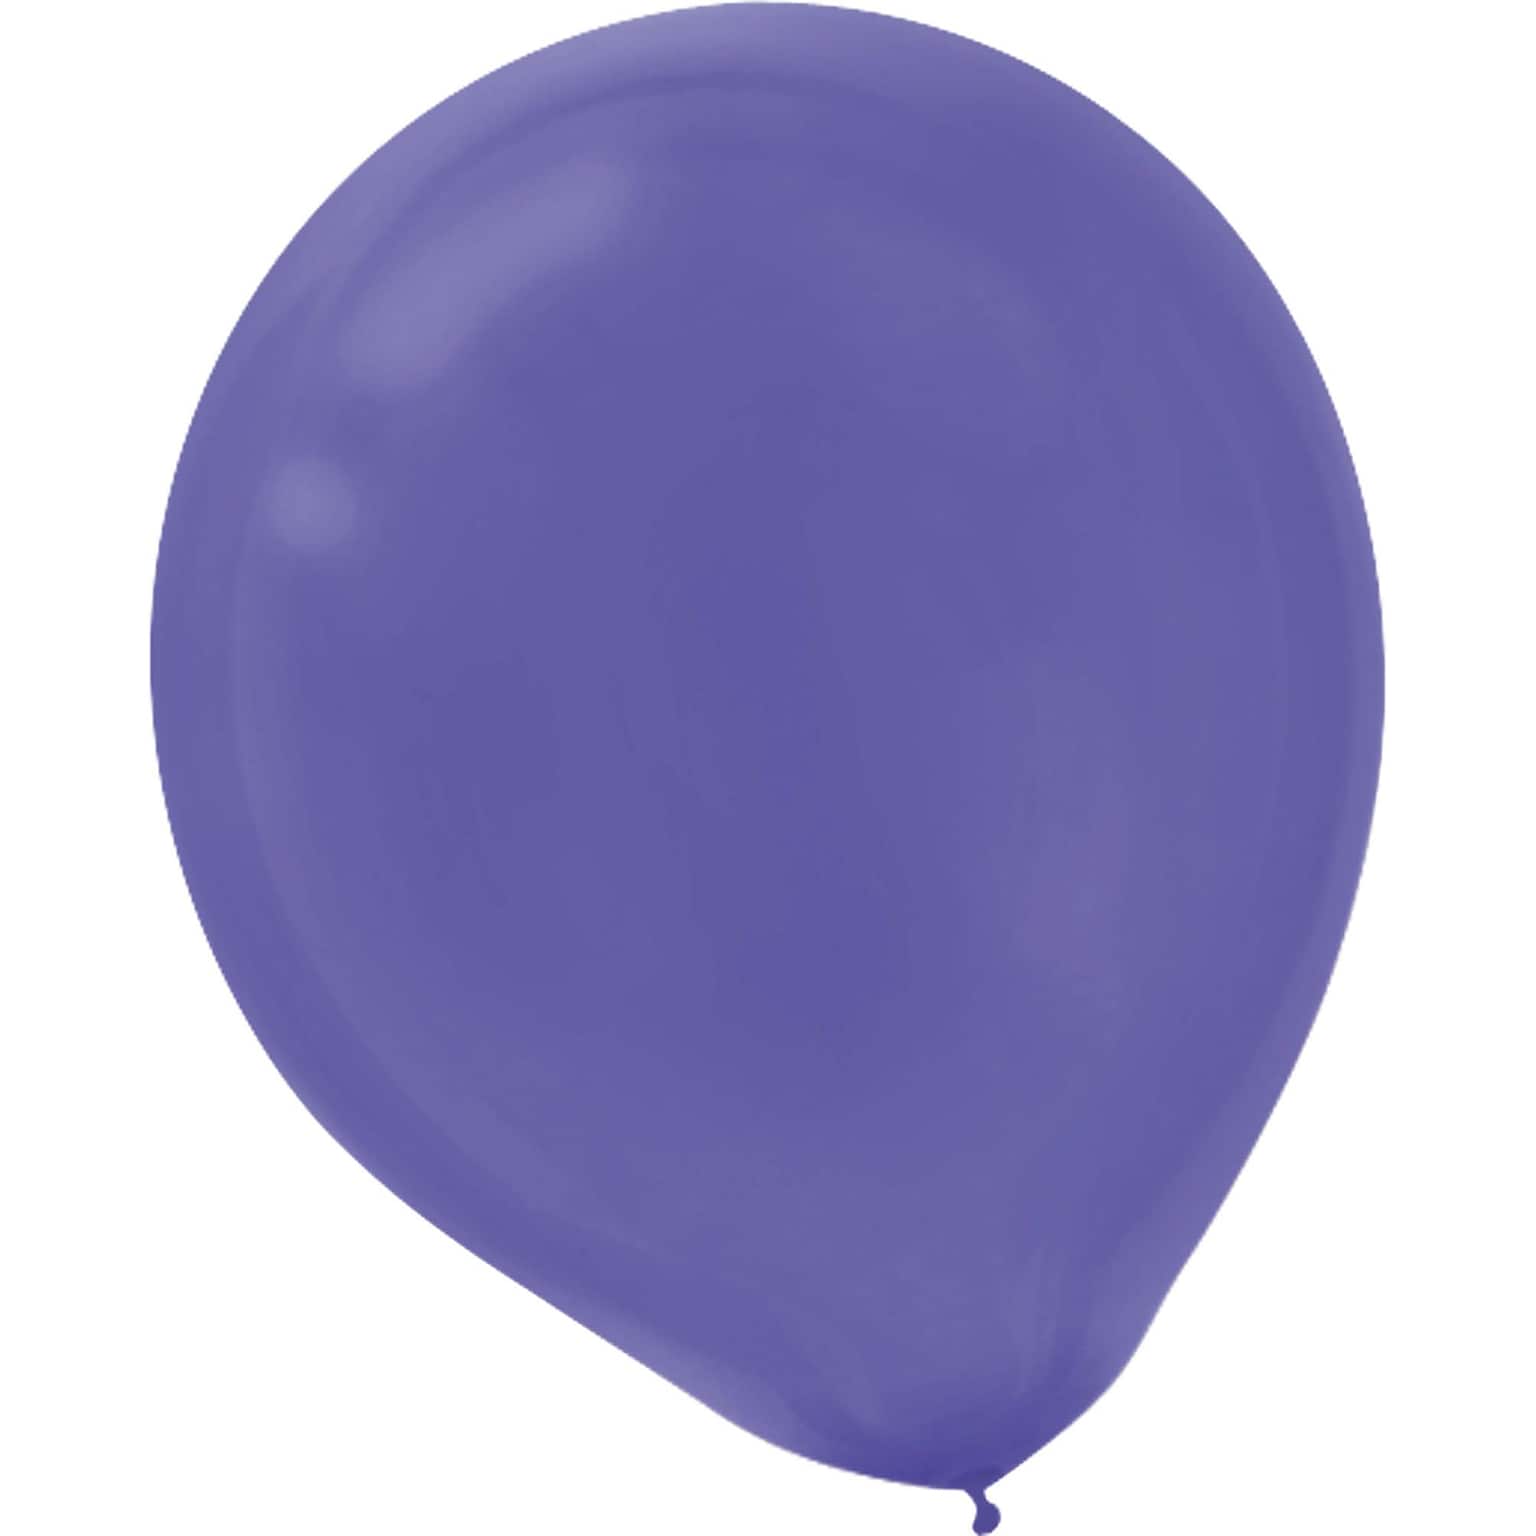 Amscan Solid Color Latex Balloons Packaged, 9, 18/Pack, New Purple, 20 Per Pack (113255.106)